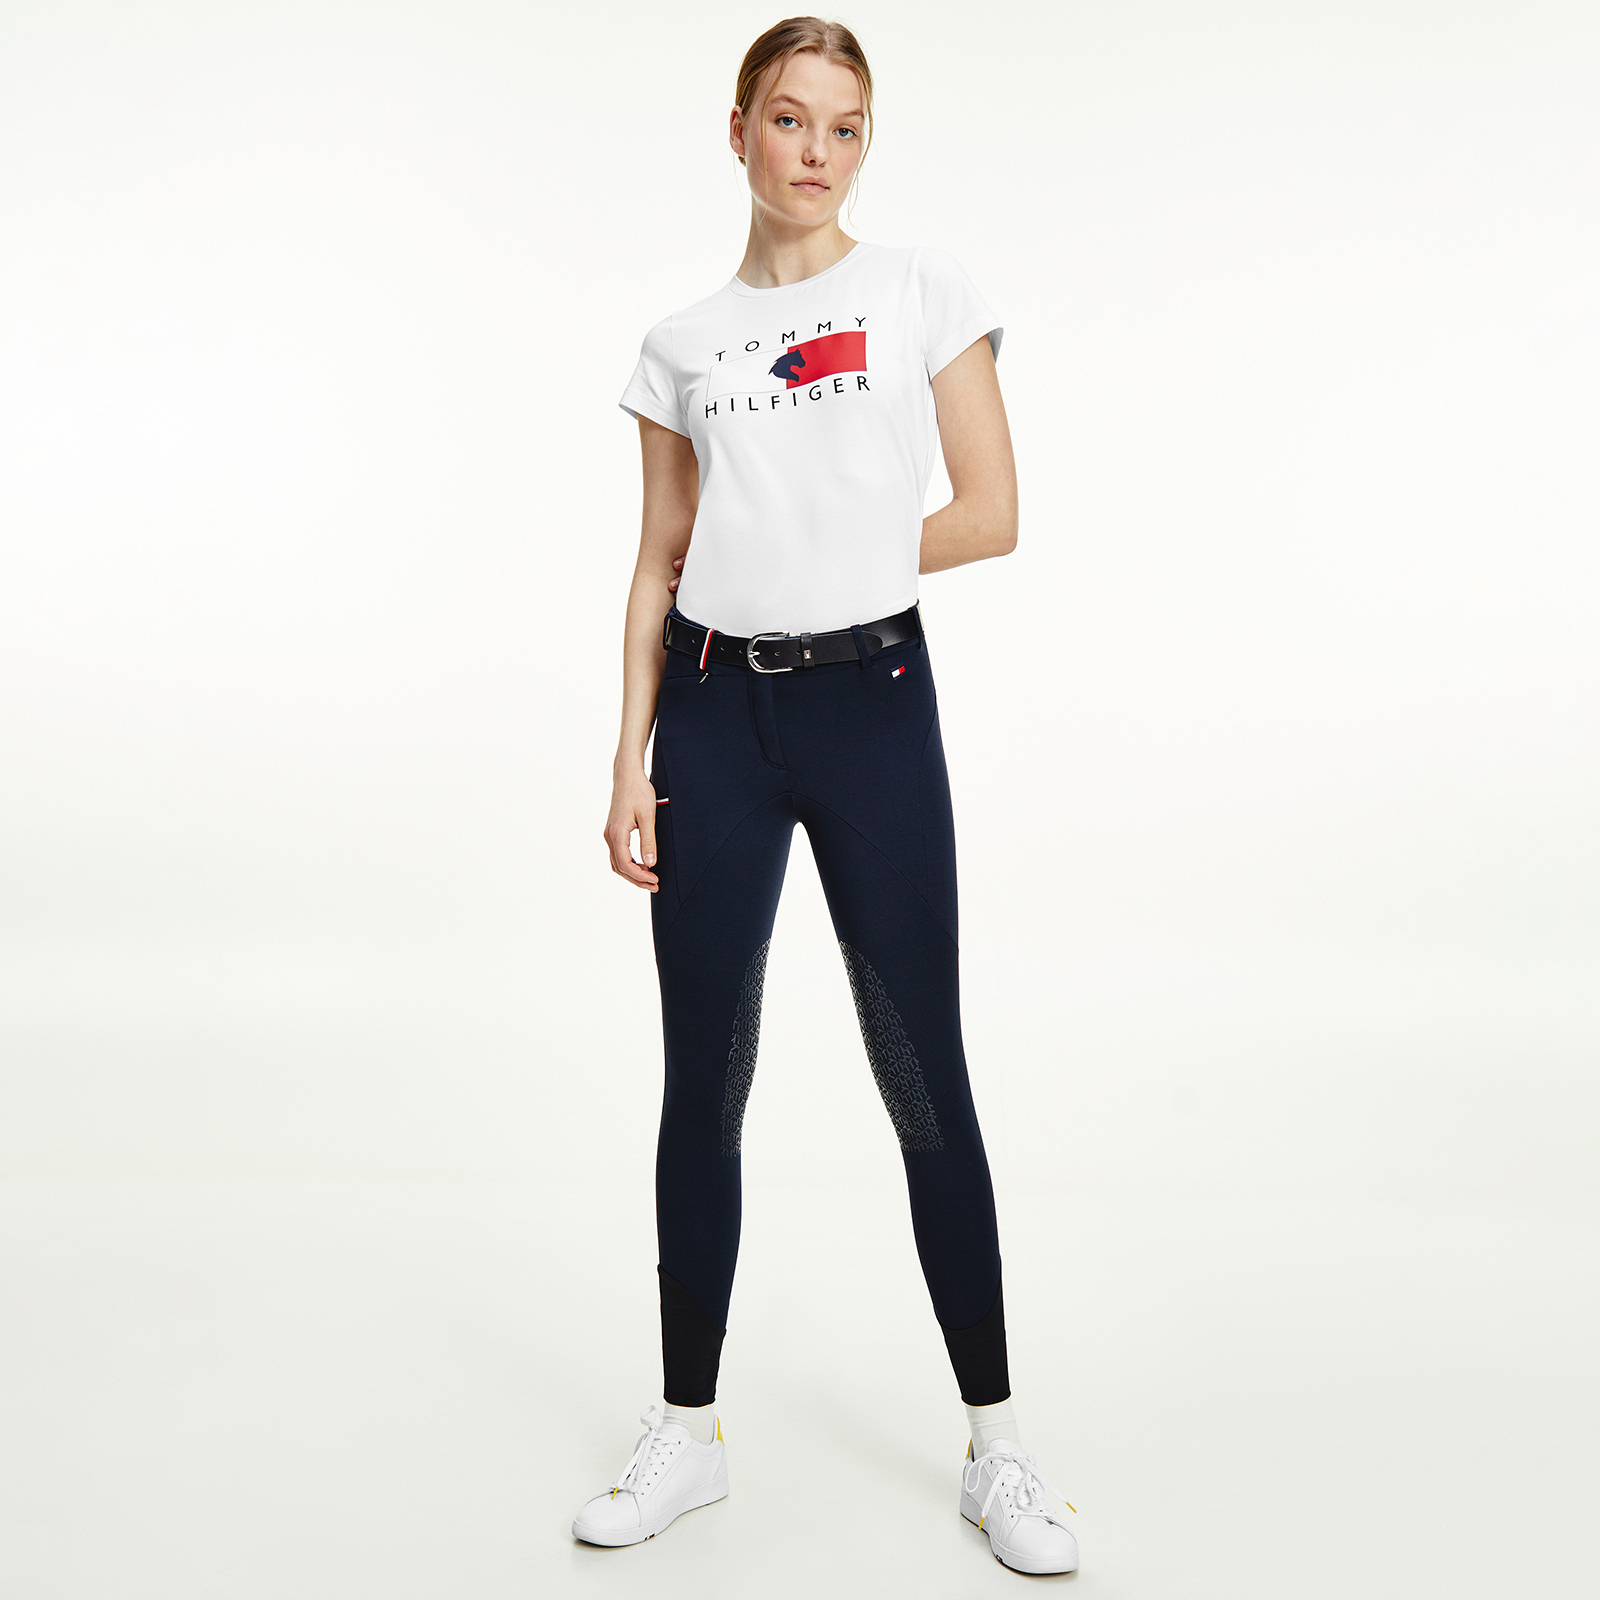 Tommy Hilfiger Equestrian Performance Women's Show Breeches